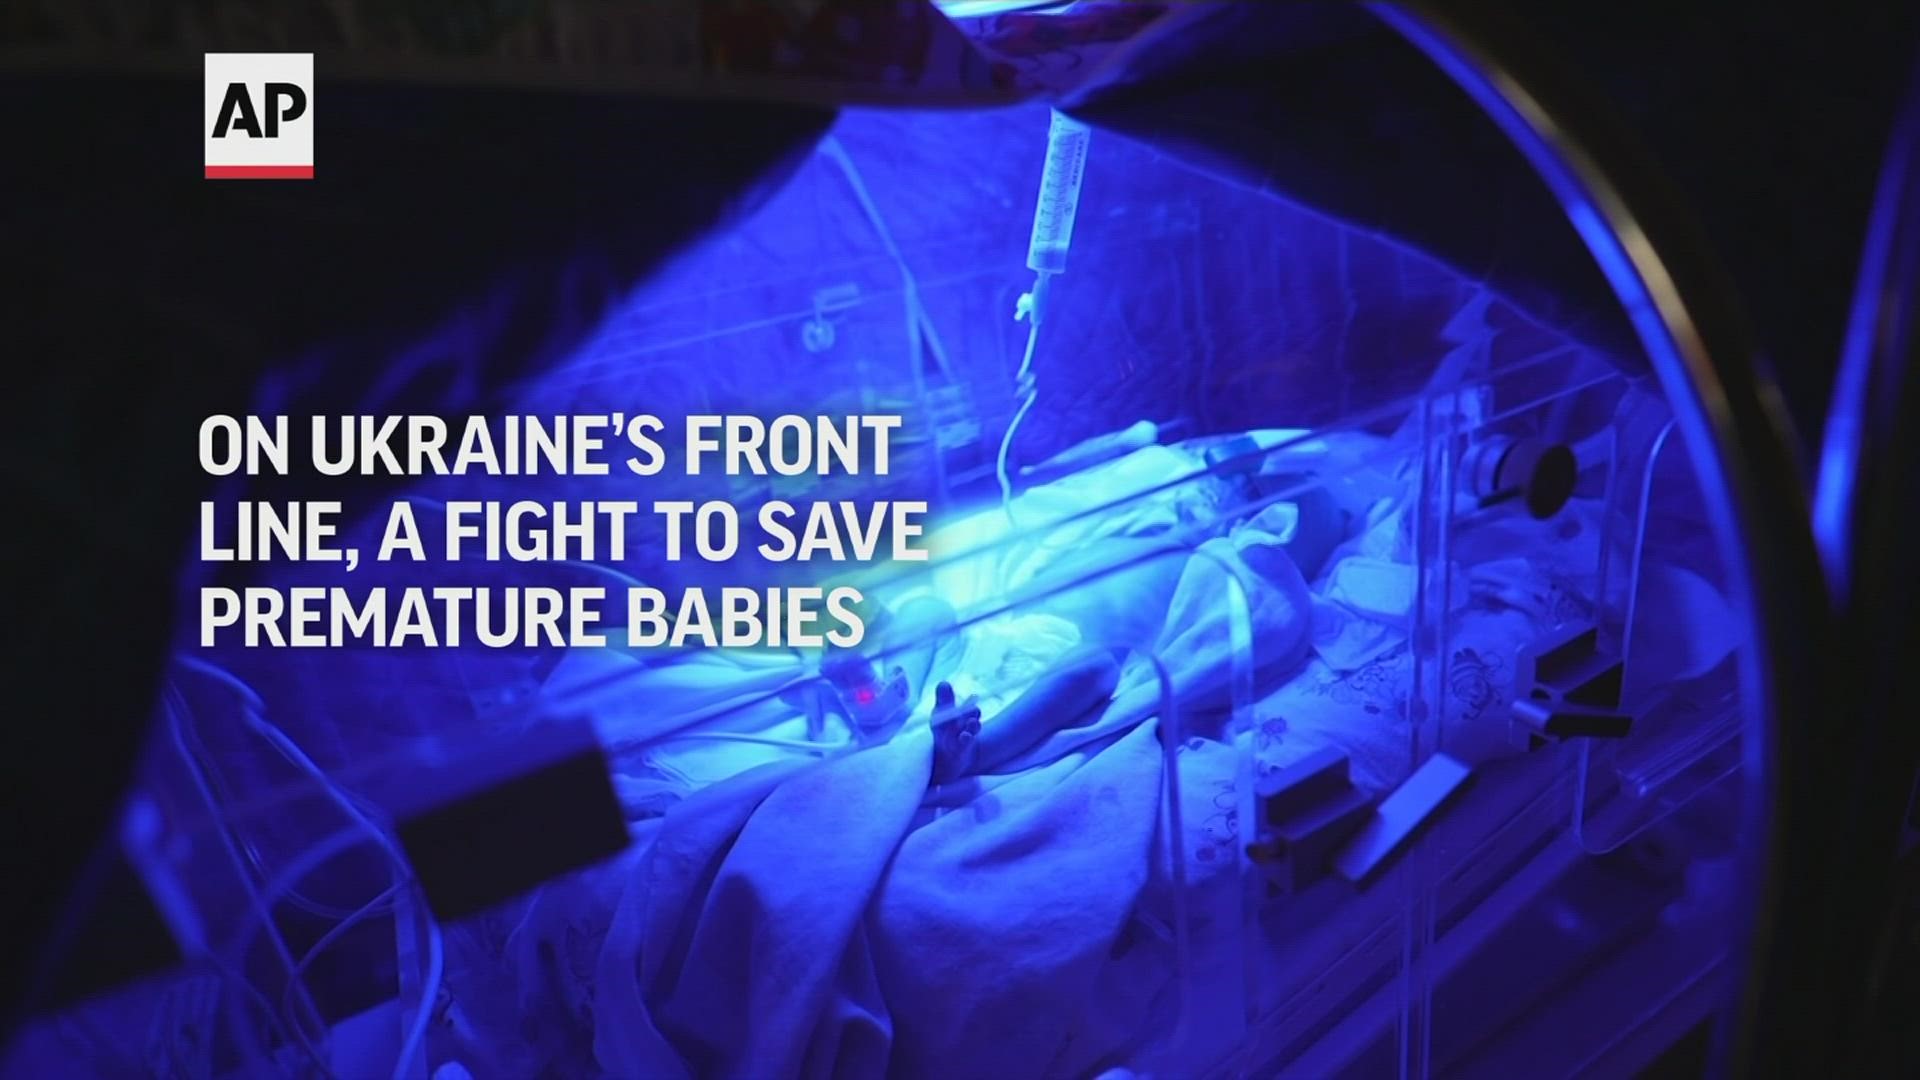 Even when air-raid signals sound, it's impossible to leave: Babies in the incubation ward cannot be disconnected from their lifesaving machines.